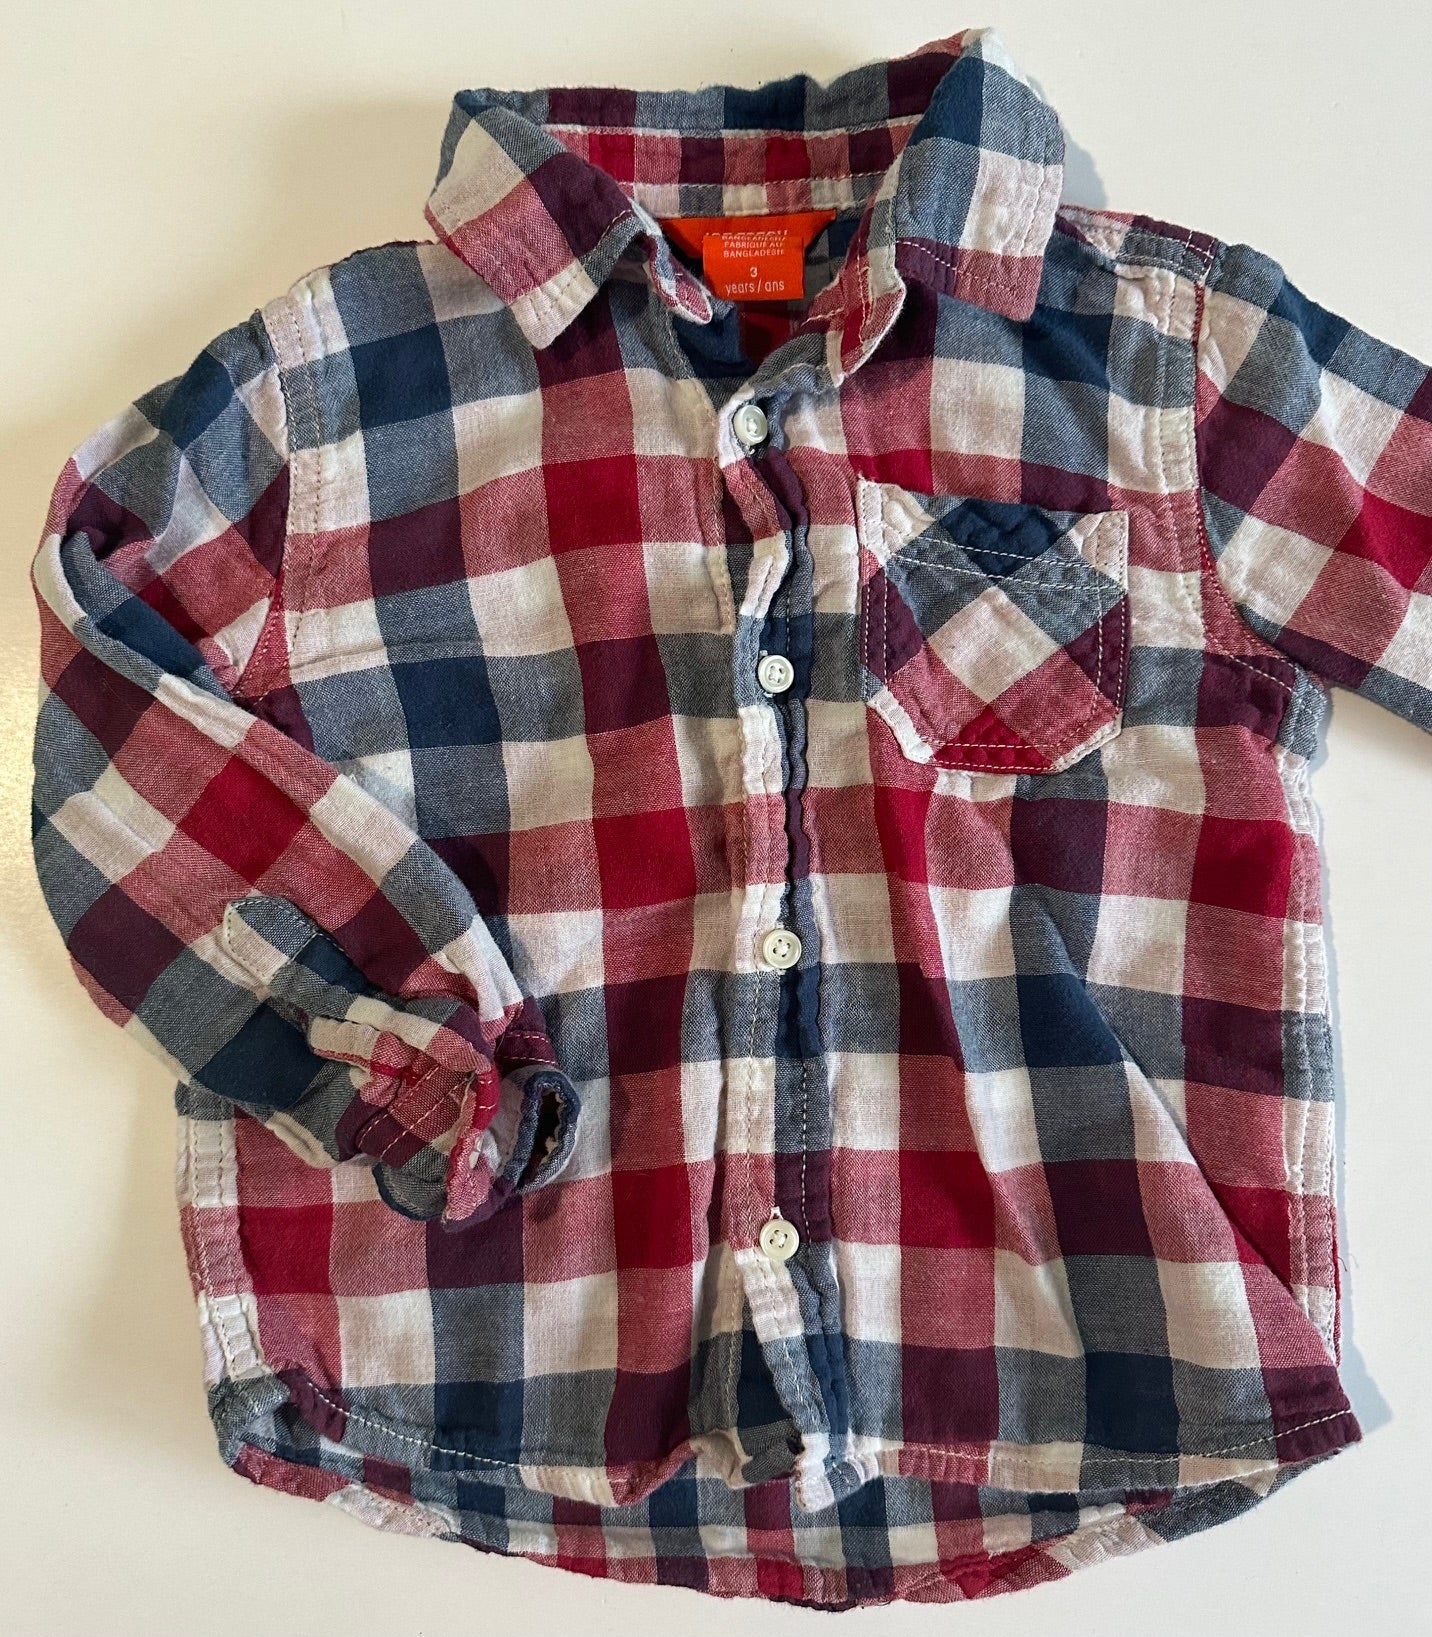 Joe Fresh, Red, Navy Blue, and White Button-Up Cotton Shirt - Size 3T